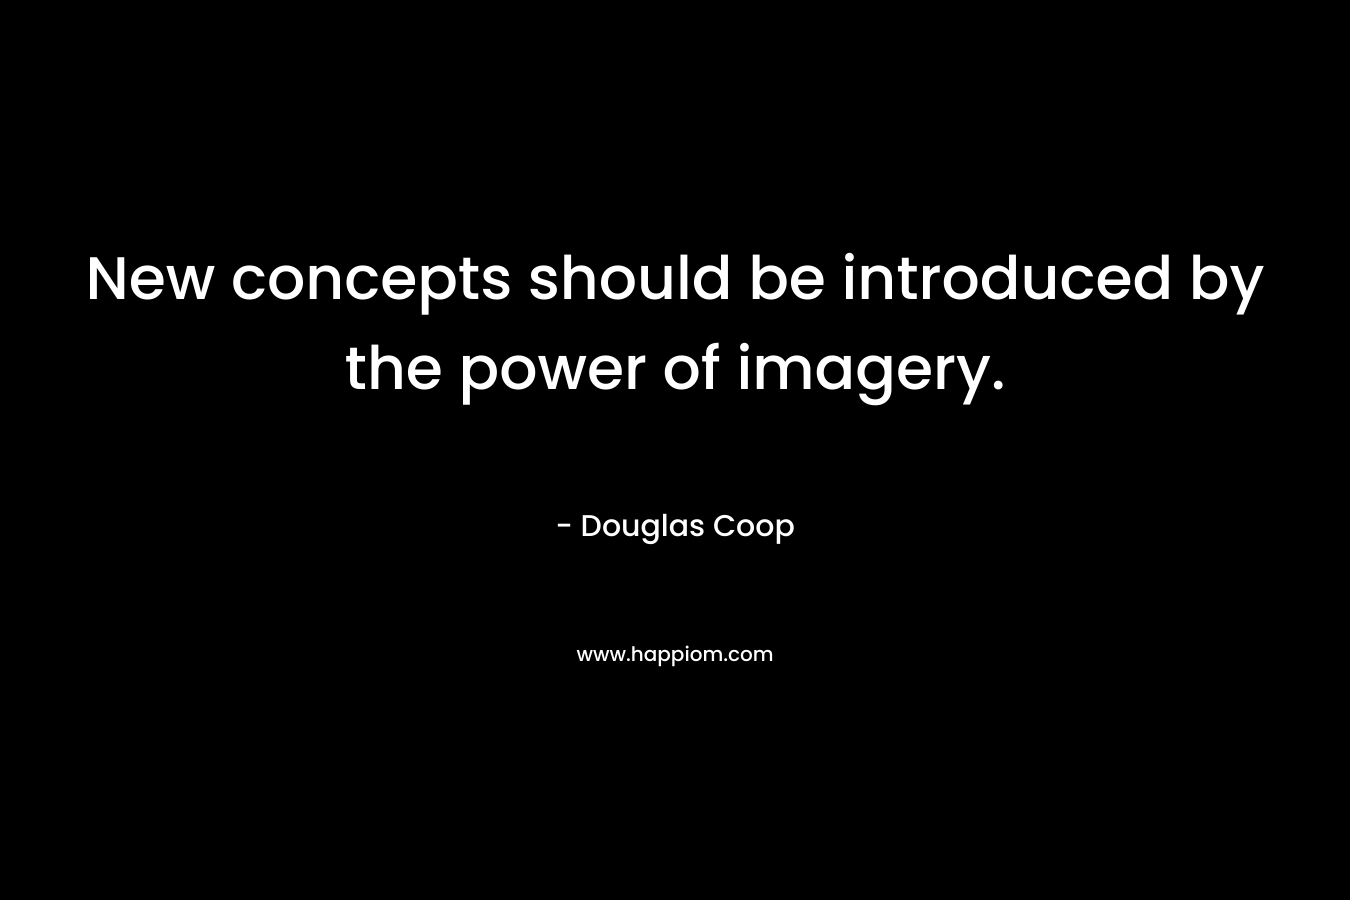 New concepts should be introduced by the power of imagery.